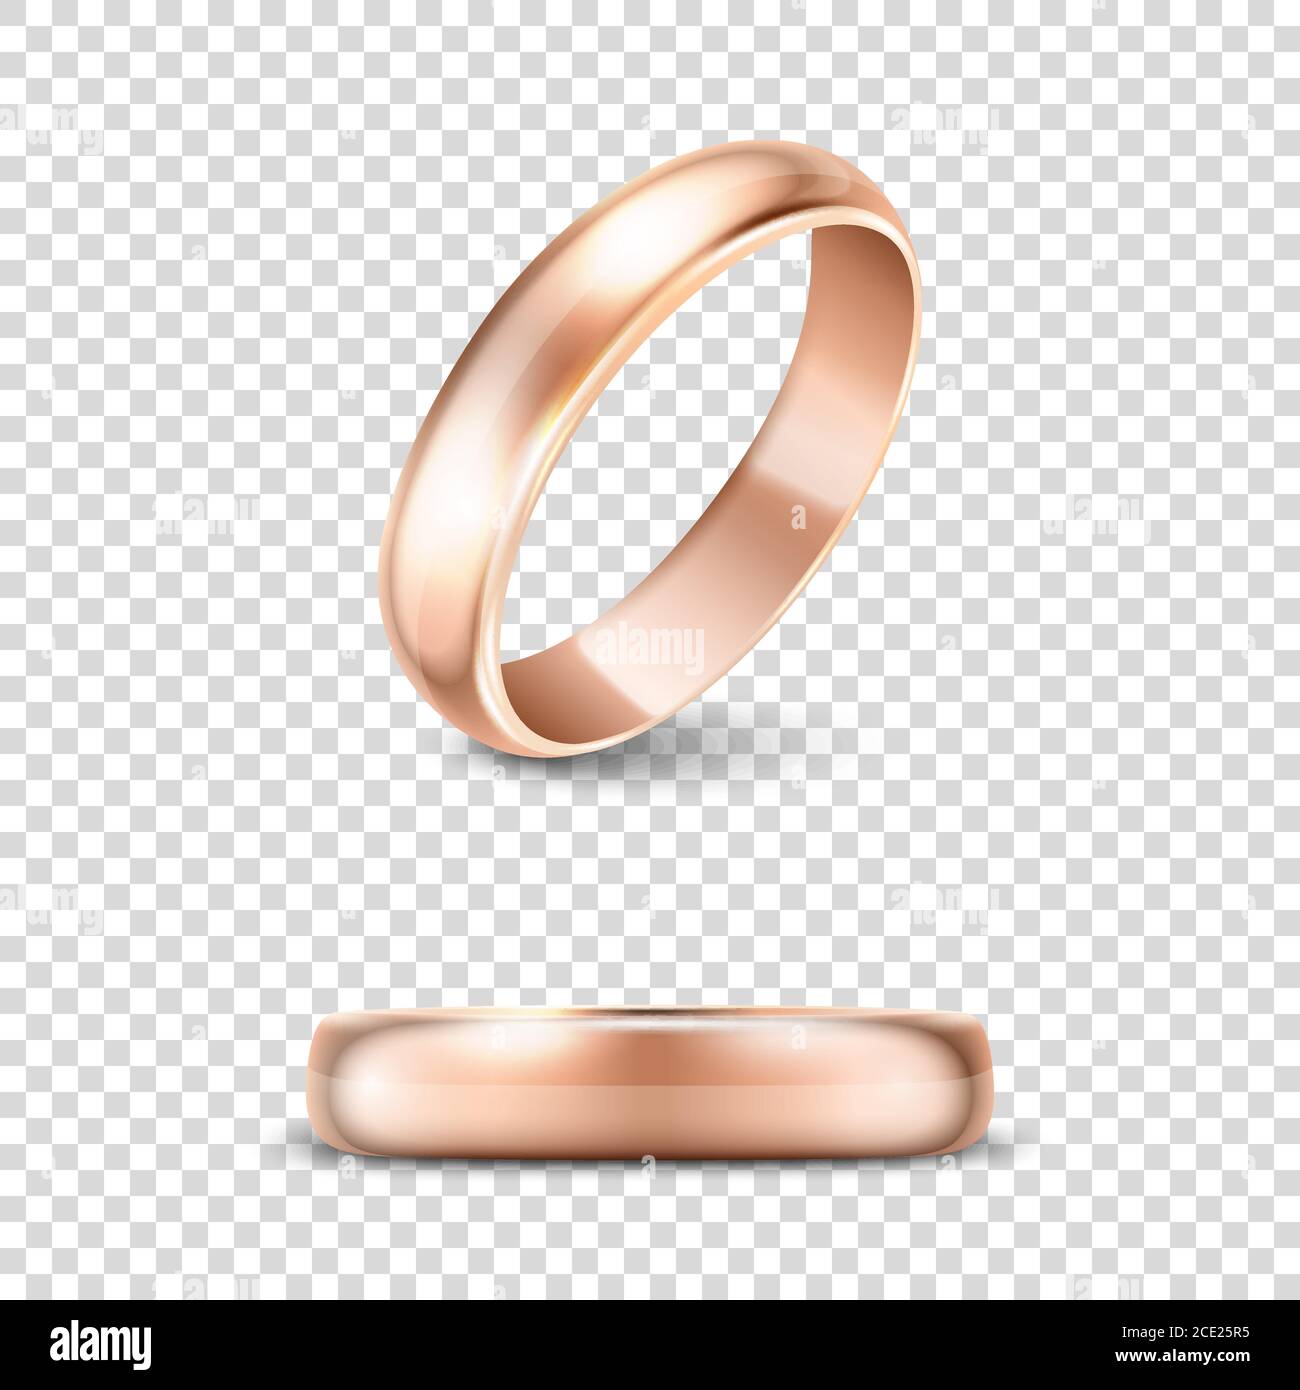 Golden Ring Clipart Background